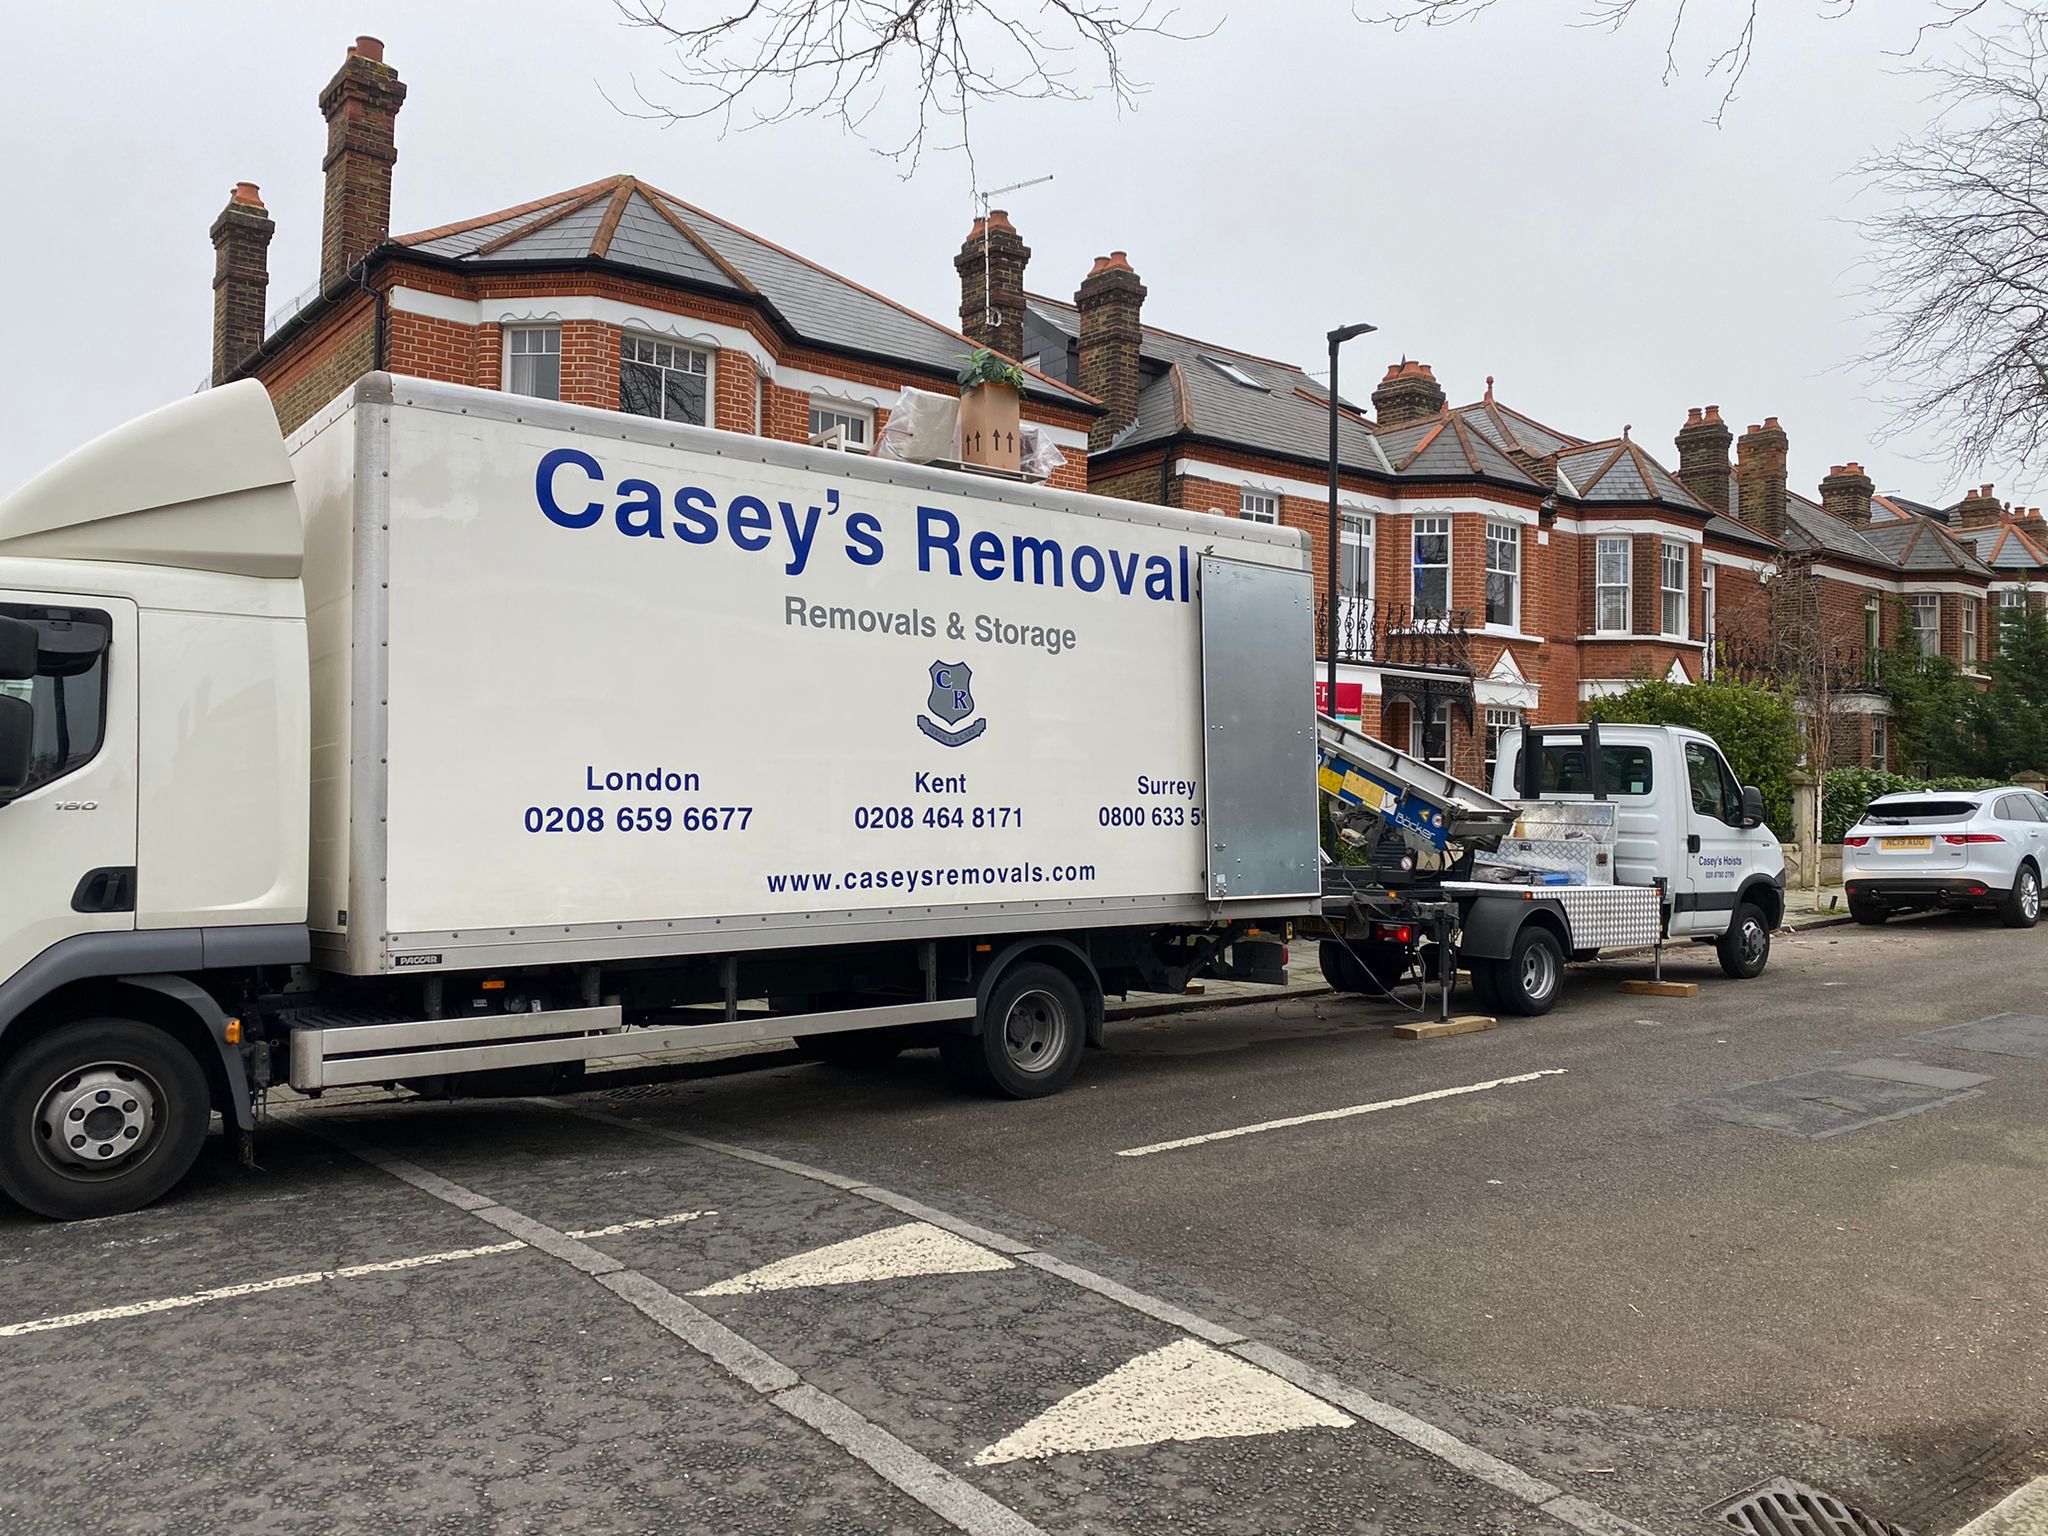 House Removal Truck with Casey's Removals printed on side parked outside a house with a hoist moving items from top window.